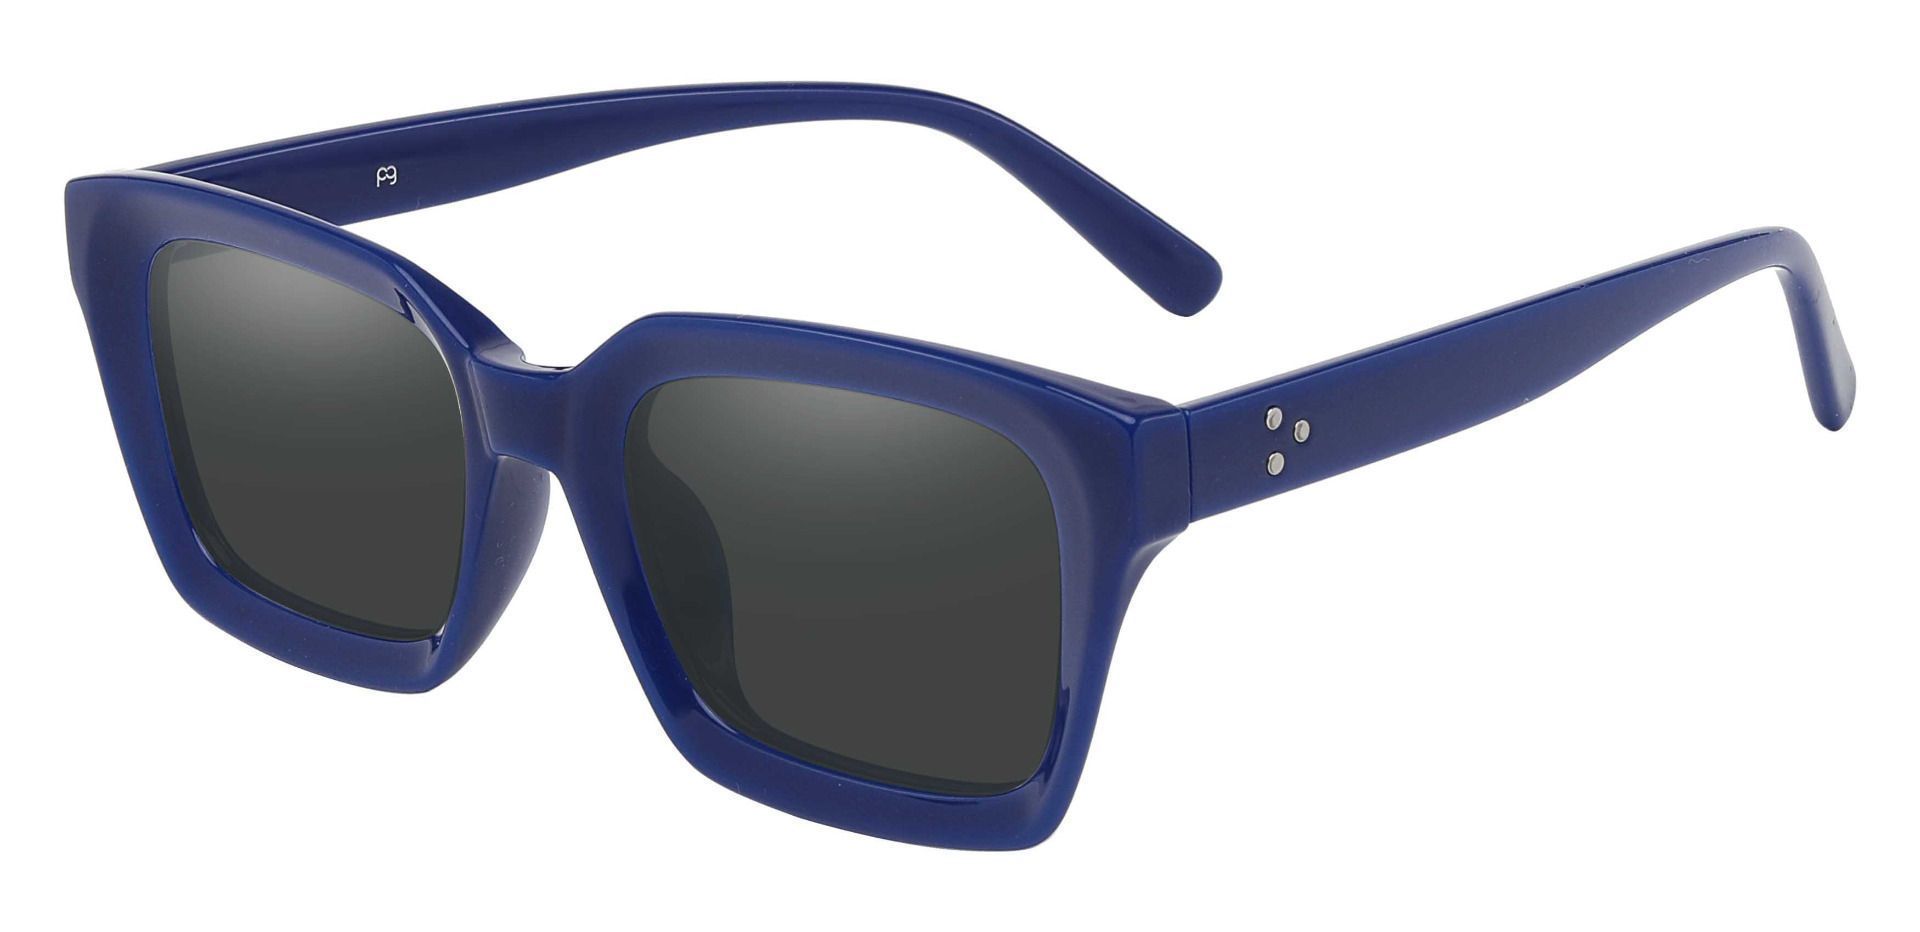 Unity Rectangle Lined Bifocal Sunglasses - Blue Frame With Gray Lenses